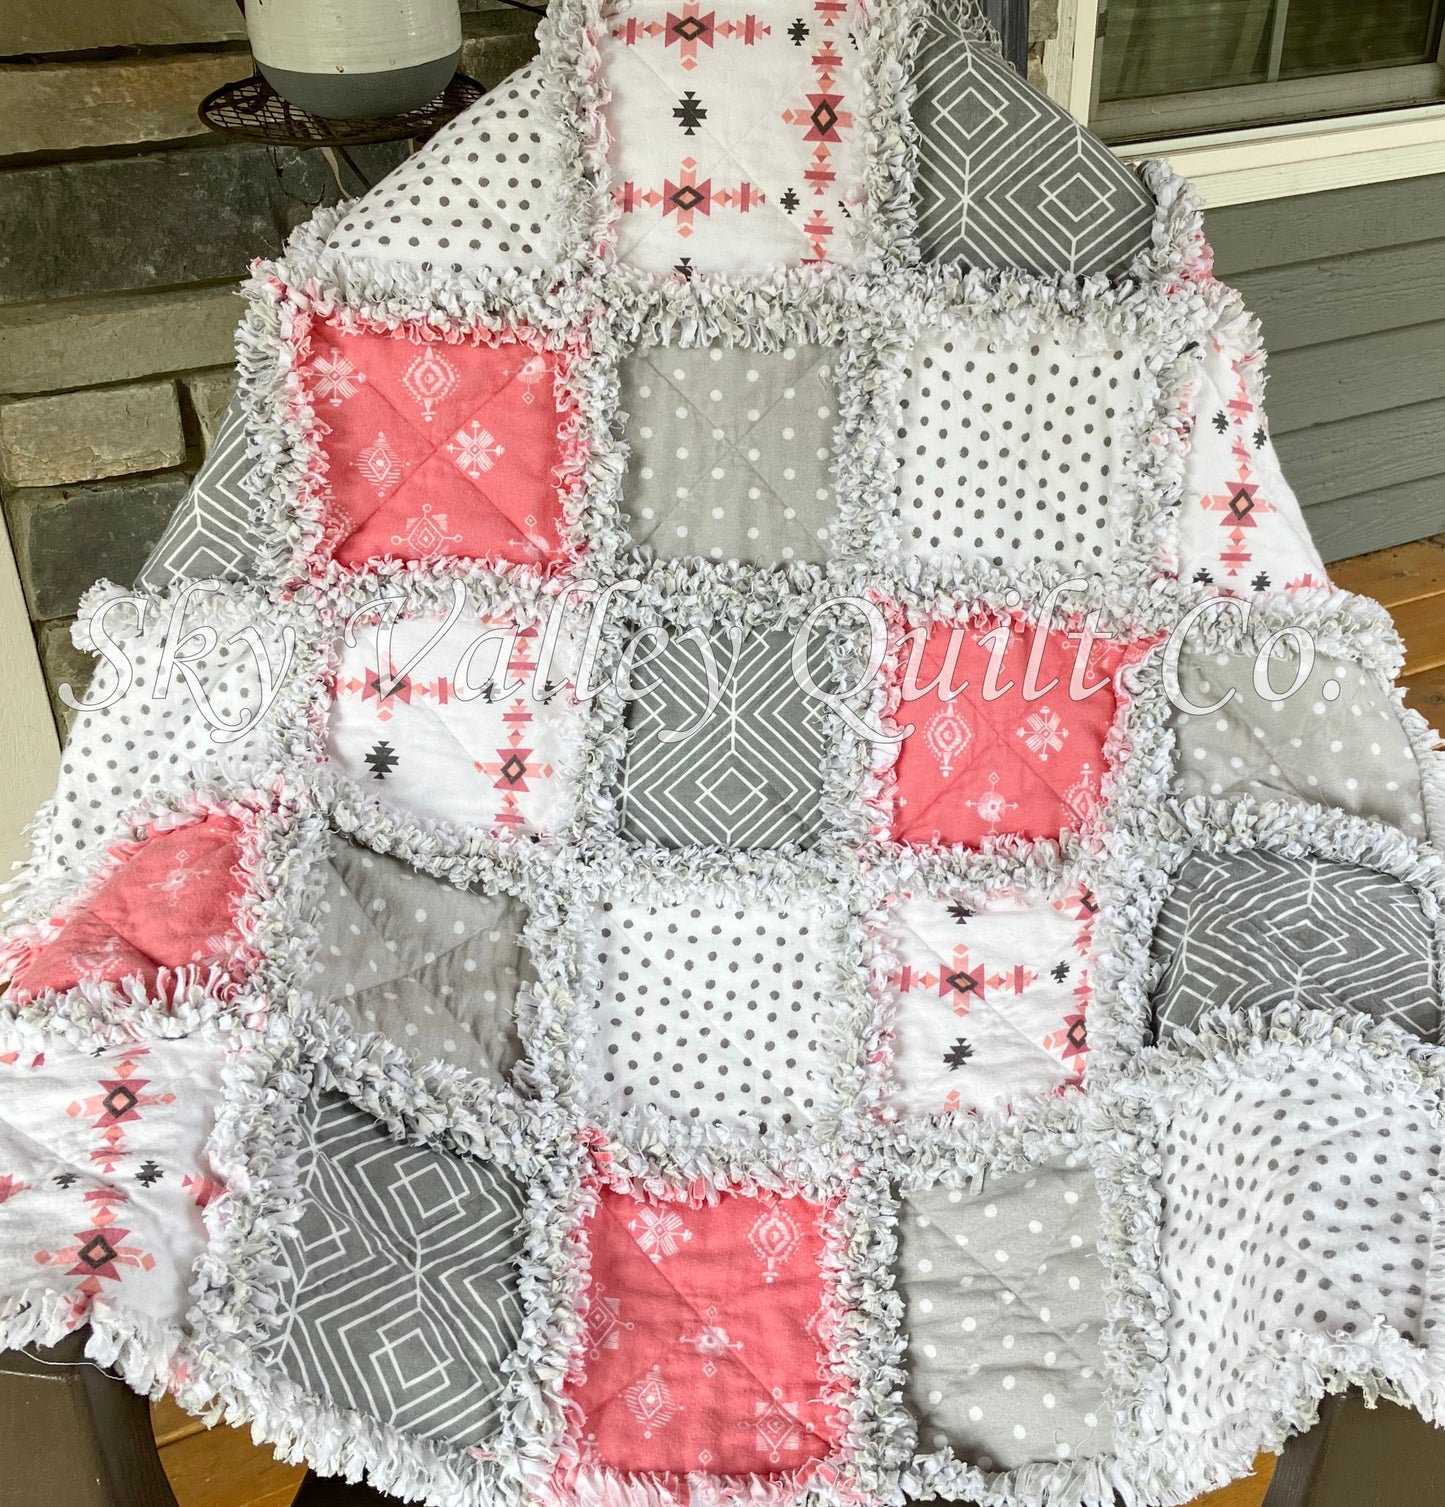 Finished rag quilt - Aztec Southwest coral and gray